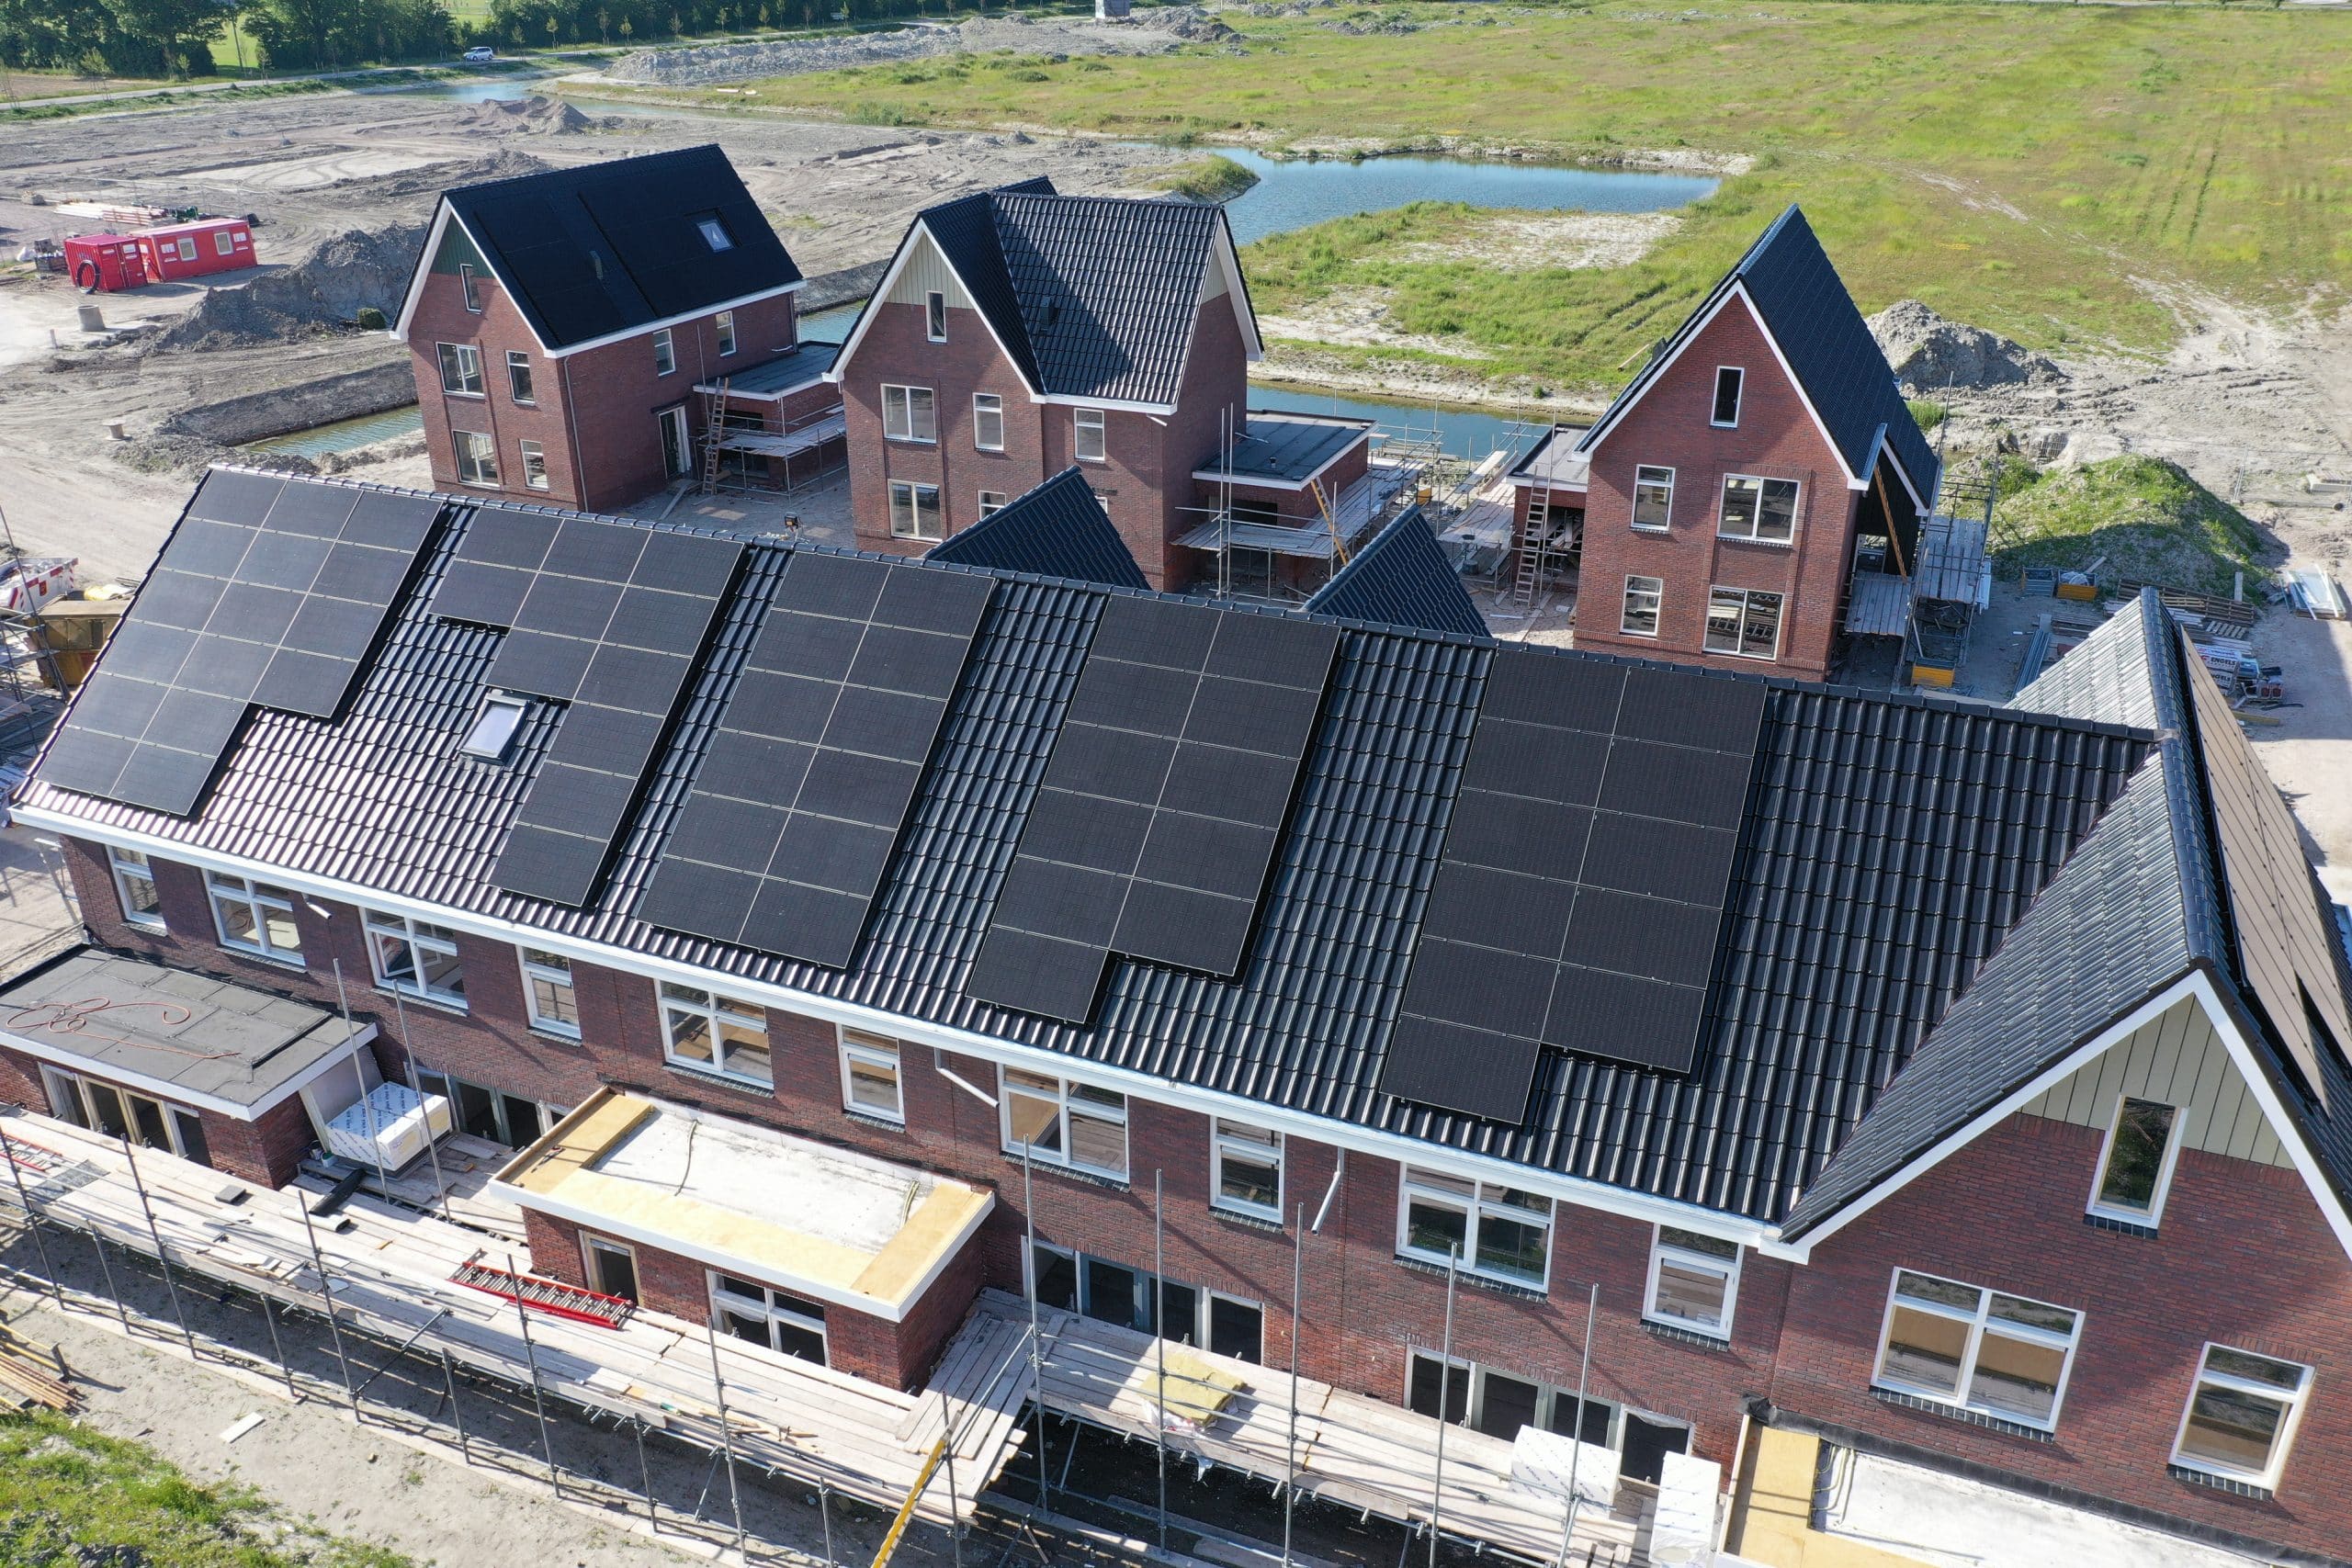 newly built well-insulated houses with black solar panels and heat pumps for economical energy consumption, this is the future for many homes. drone view